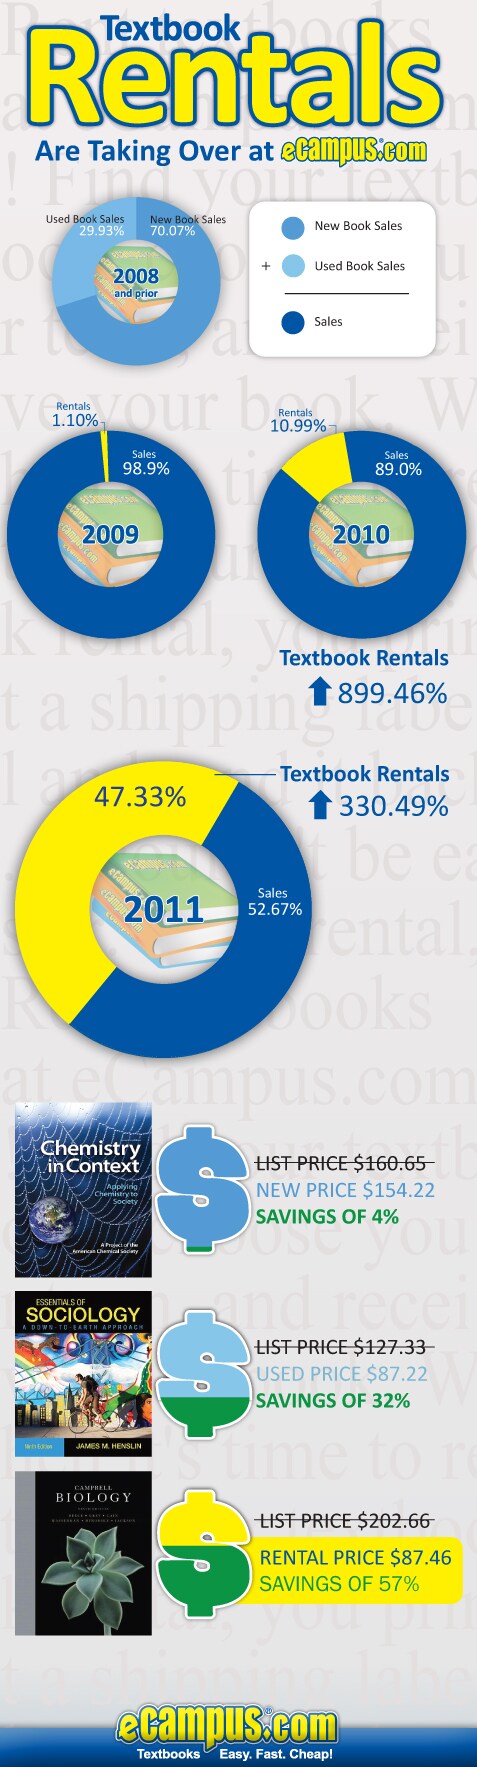 Textbook Rentals are Taking Over at eCampus.com (infographic)